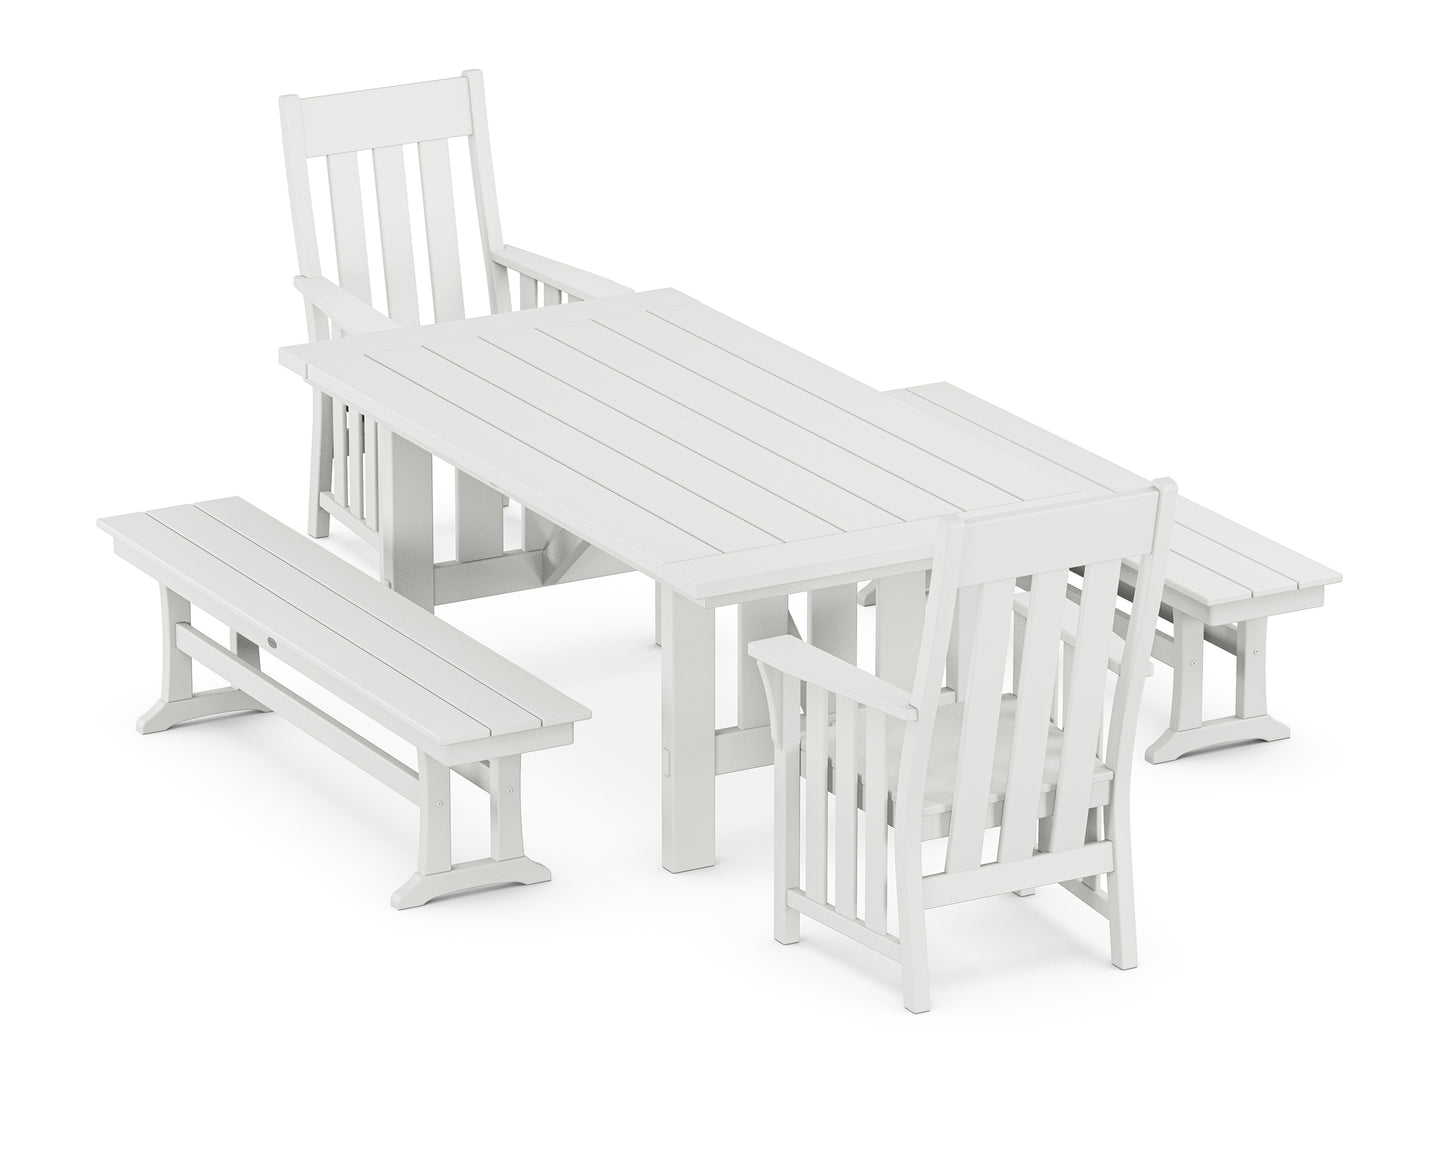 Acadia 5-Piece Dining Set with Benches